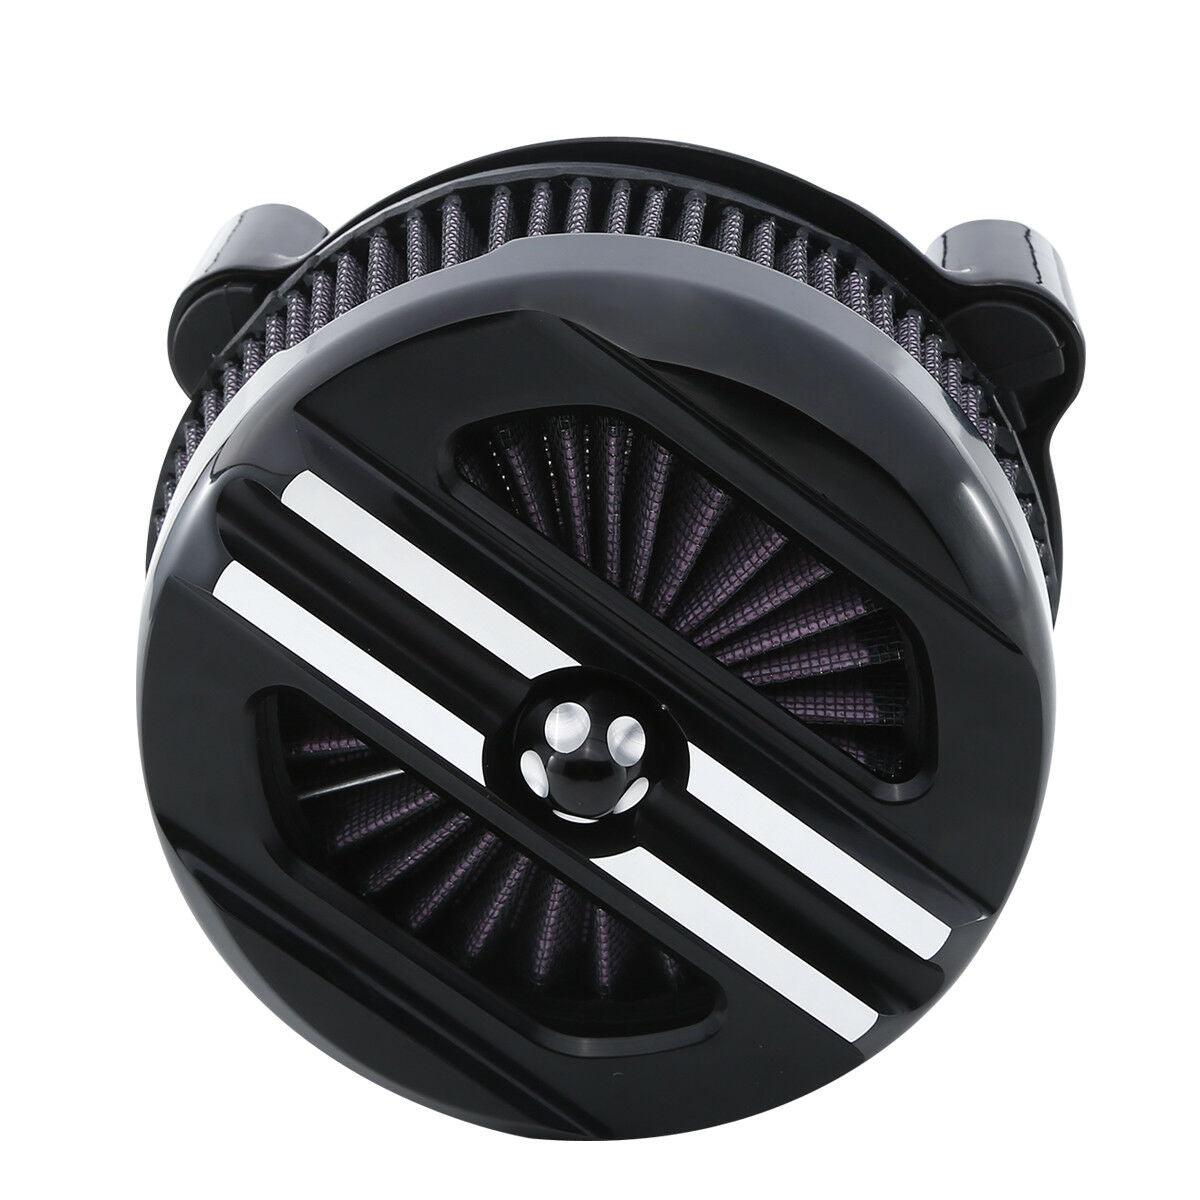 Black Air Cleaner Intake Filter Fit For Harley Sportster 1200 Iron 883 07-later - Moto Life Products